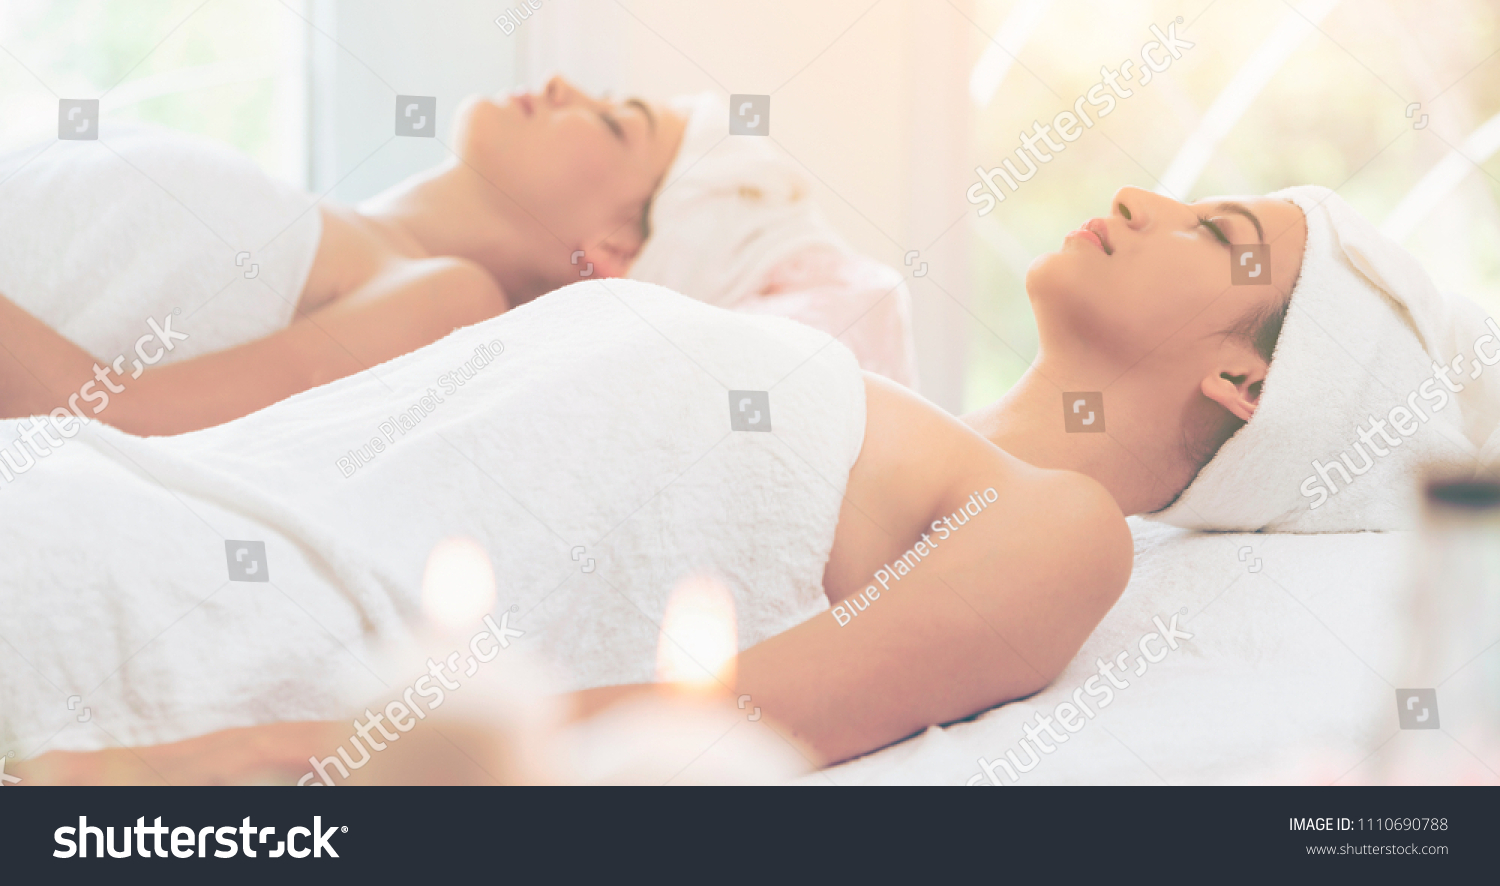 Relaxed young woman lying on spa bed prepared for facial treatment and massage in luxury spa resort. Wellness, stress relief and rejuvenation concept. #1110690788